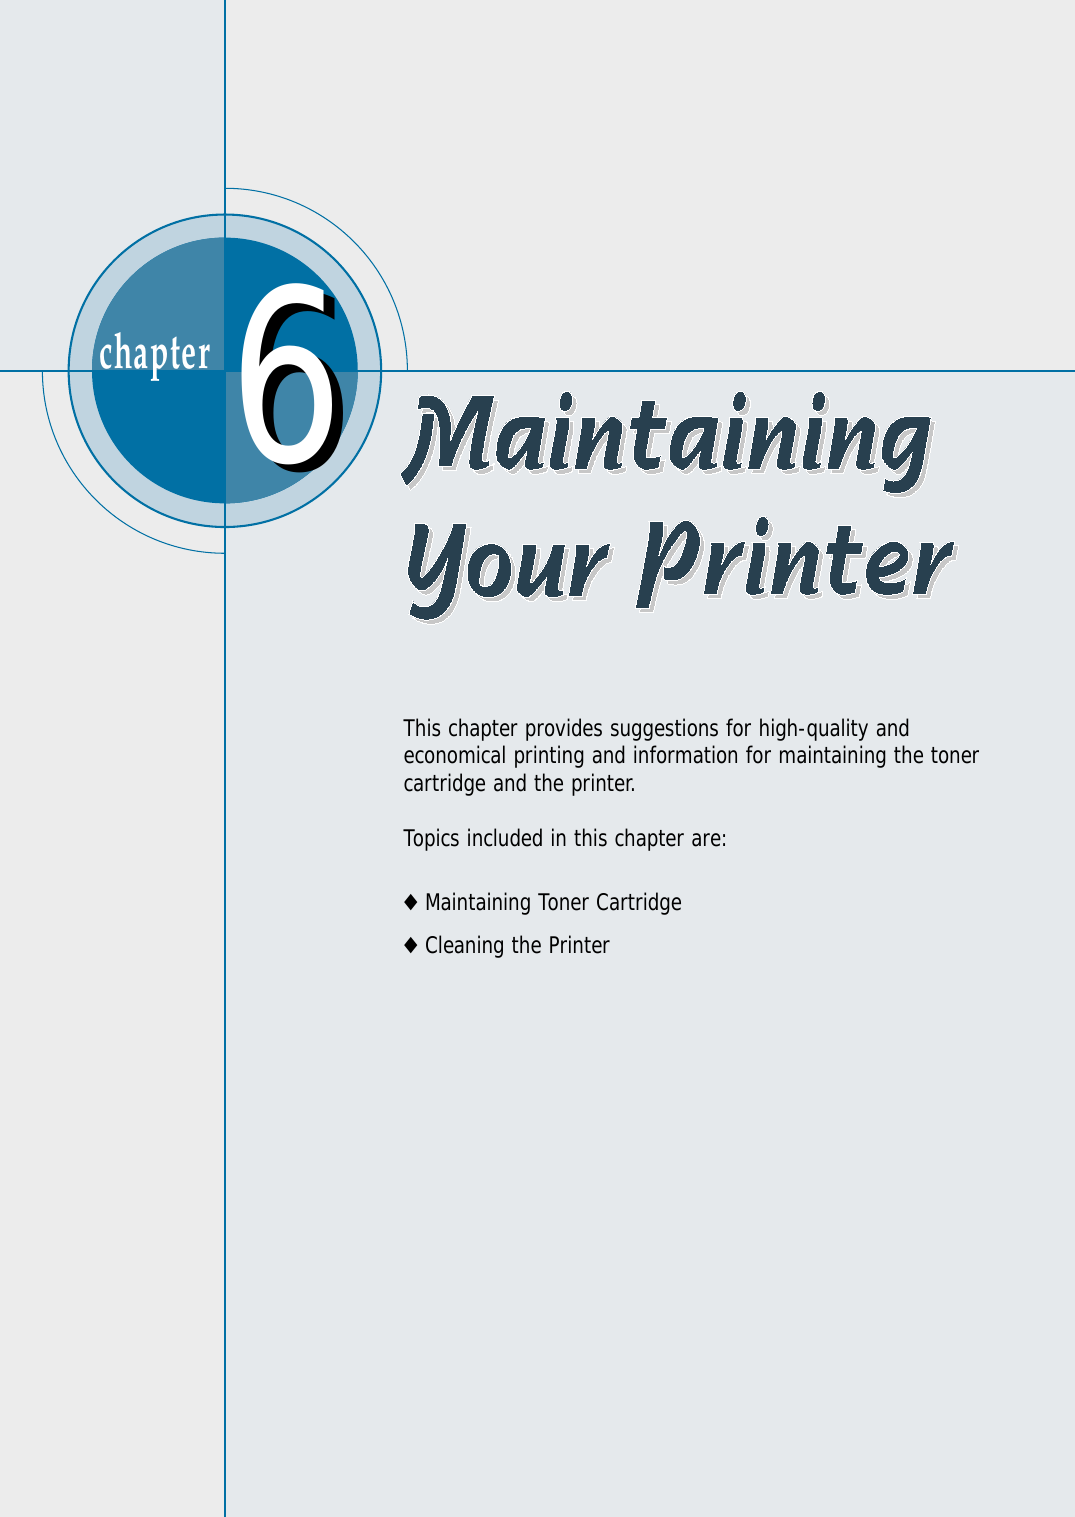 chapter  This chapter provides suggestions for high-quality andeconomical printing and information for maintaining the tonercartridge and the printer. Topics included in this chapter are:◆Maintaining Toner Cartridge◆Cleaning the Printer66